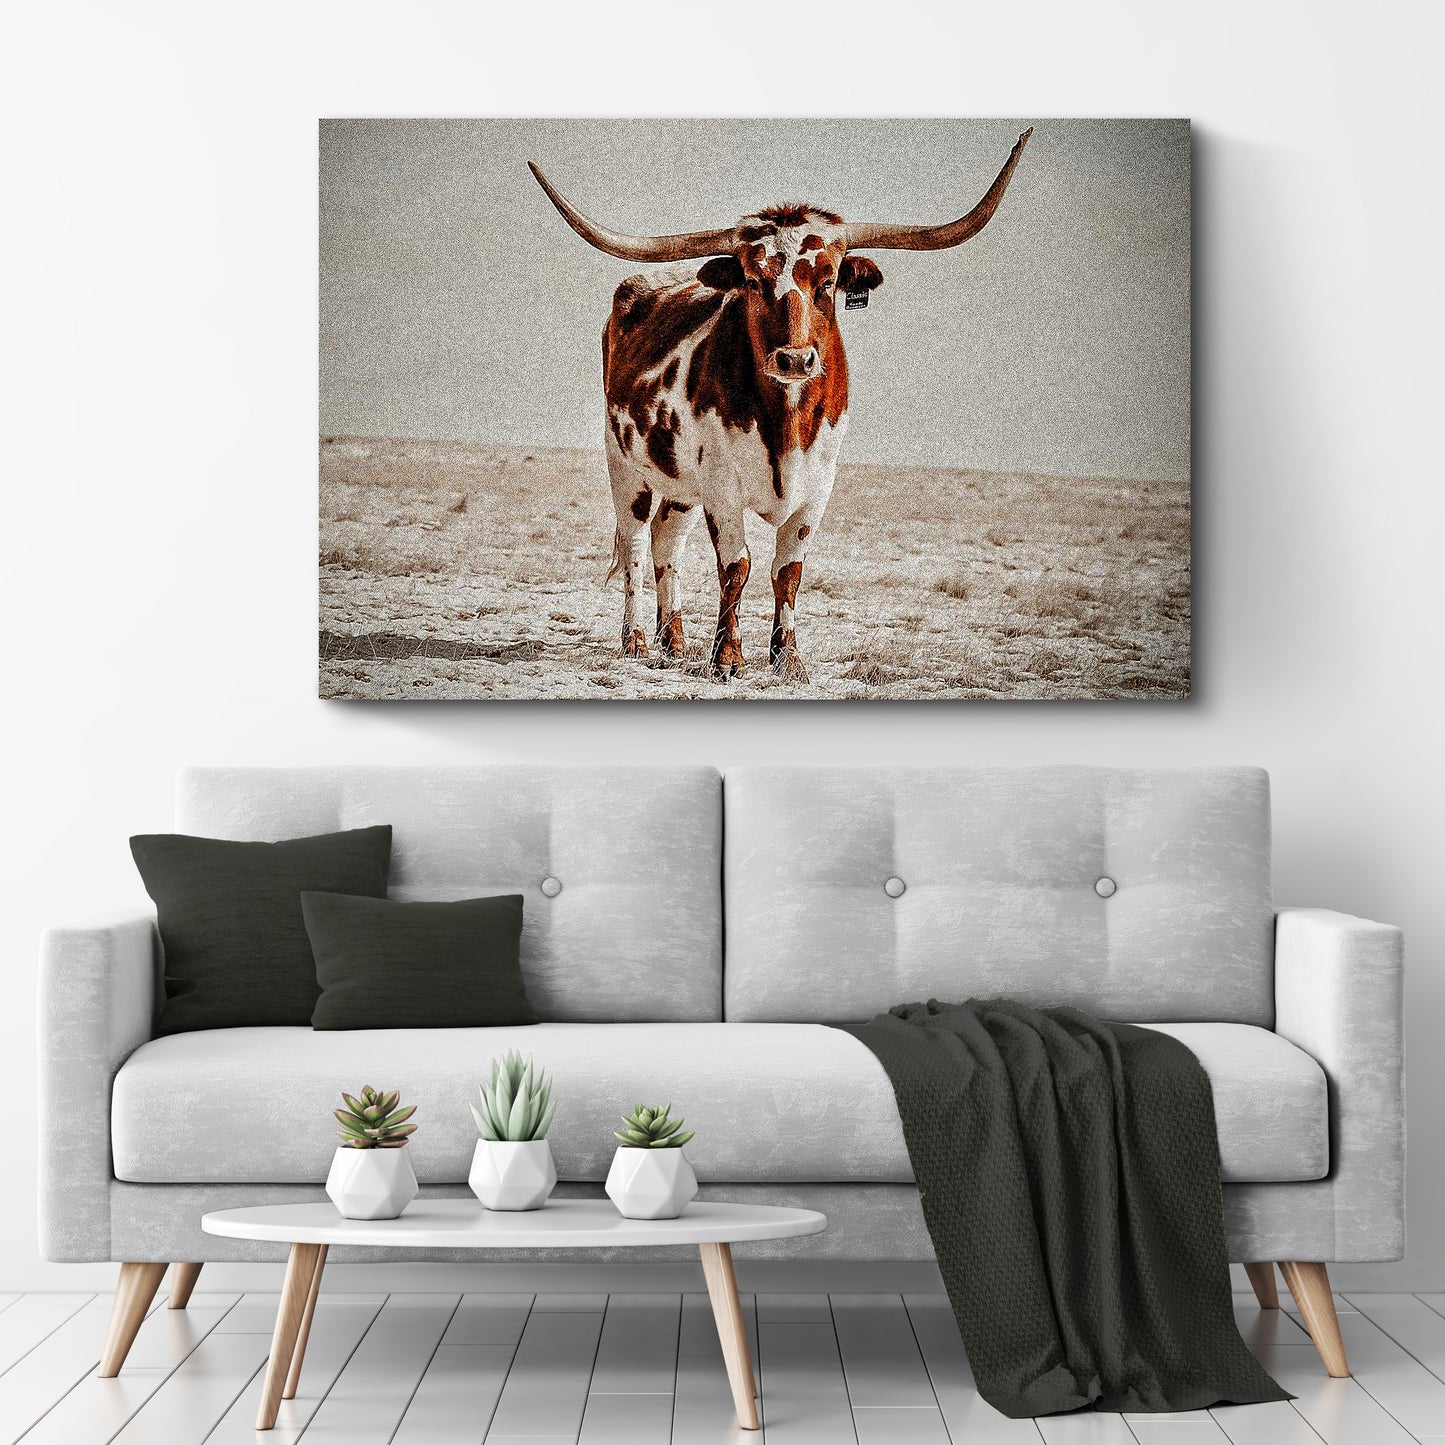 Vintage Longhorn Cattle Canvas Wall Art Style 2 - Image by Tailored Canvases